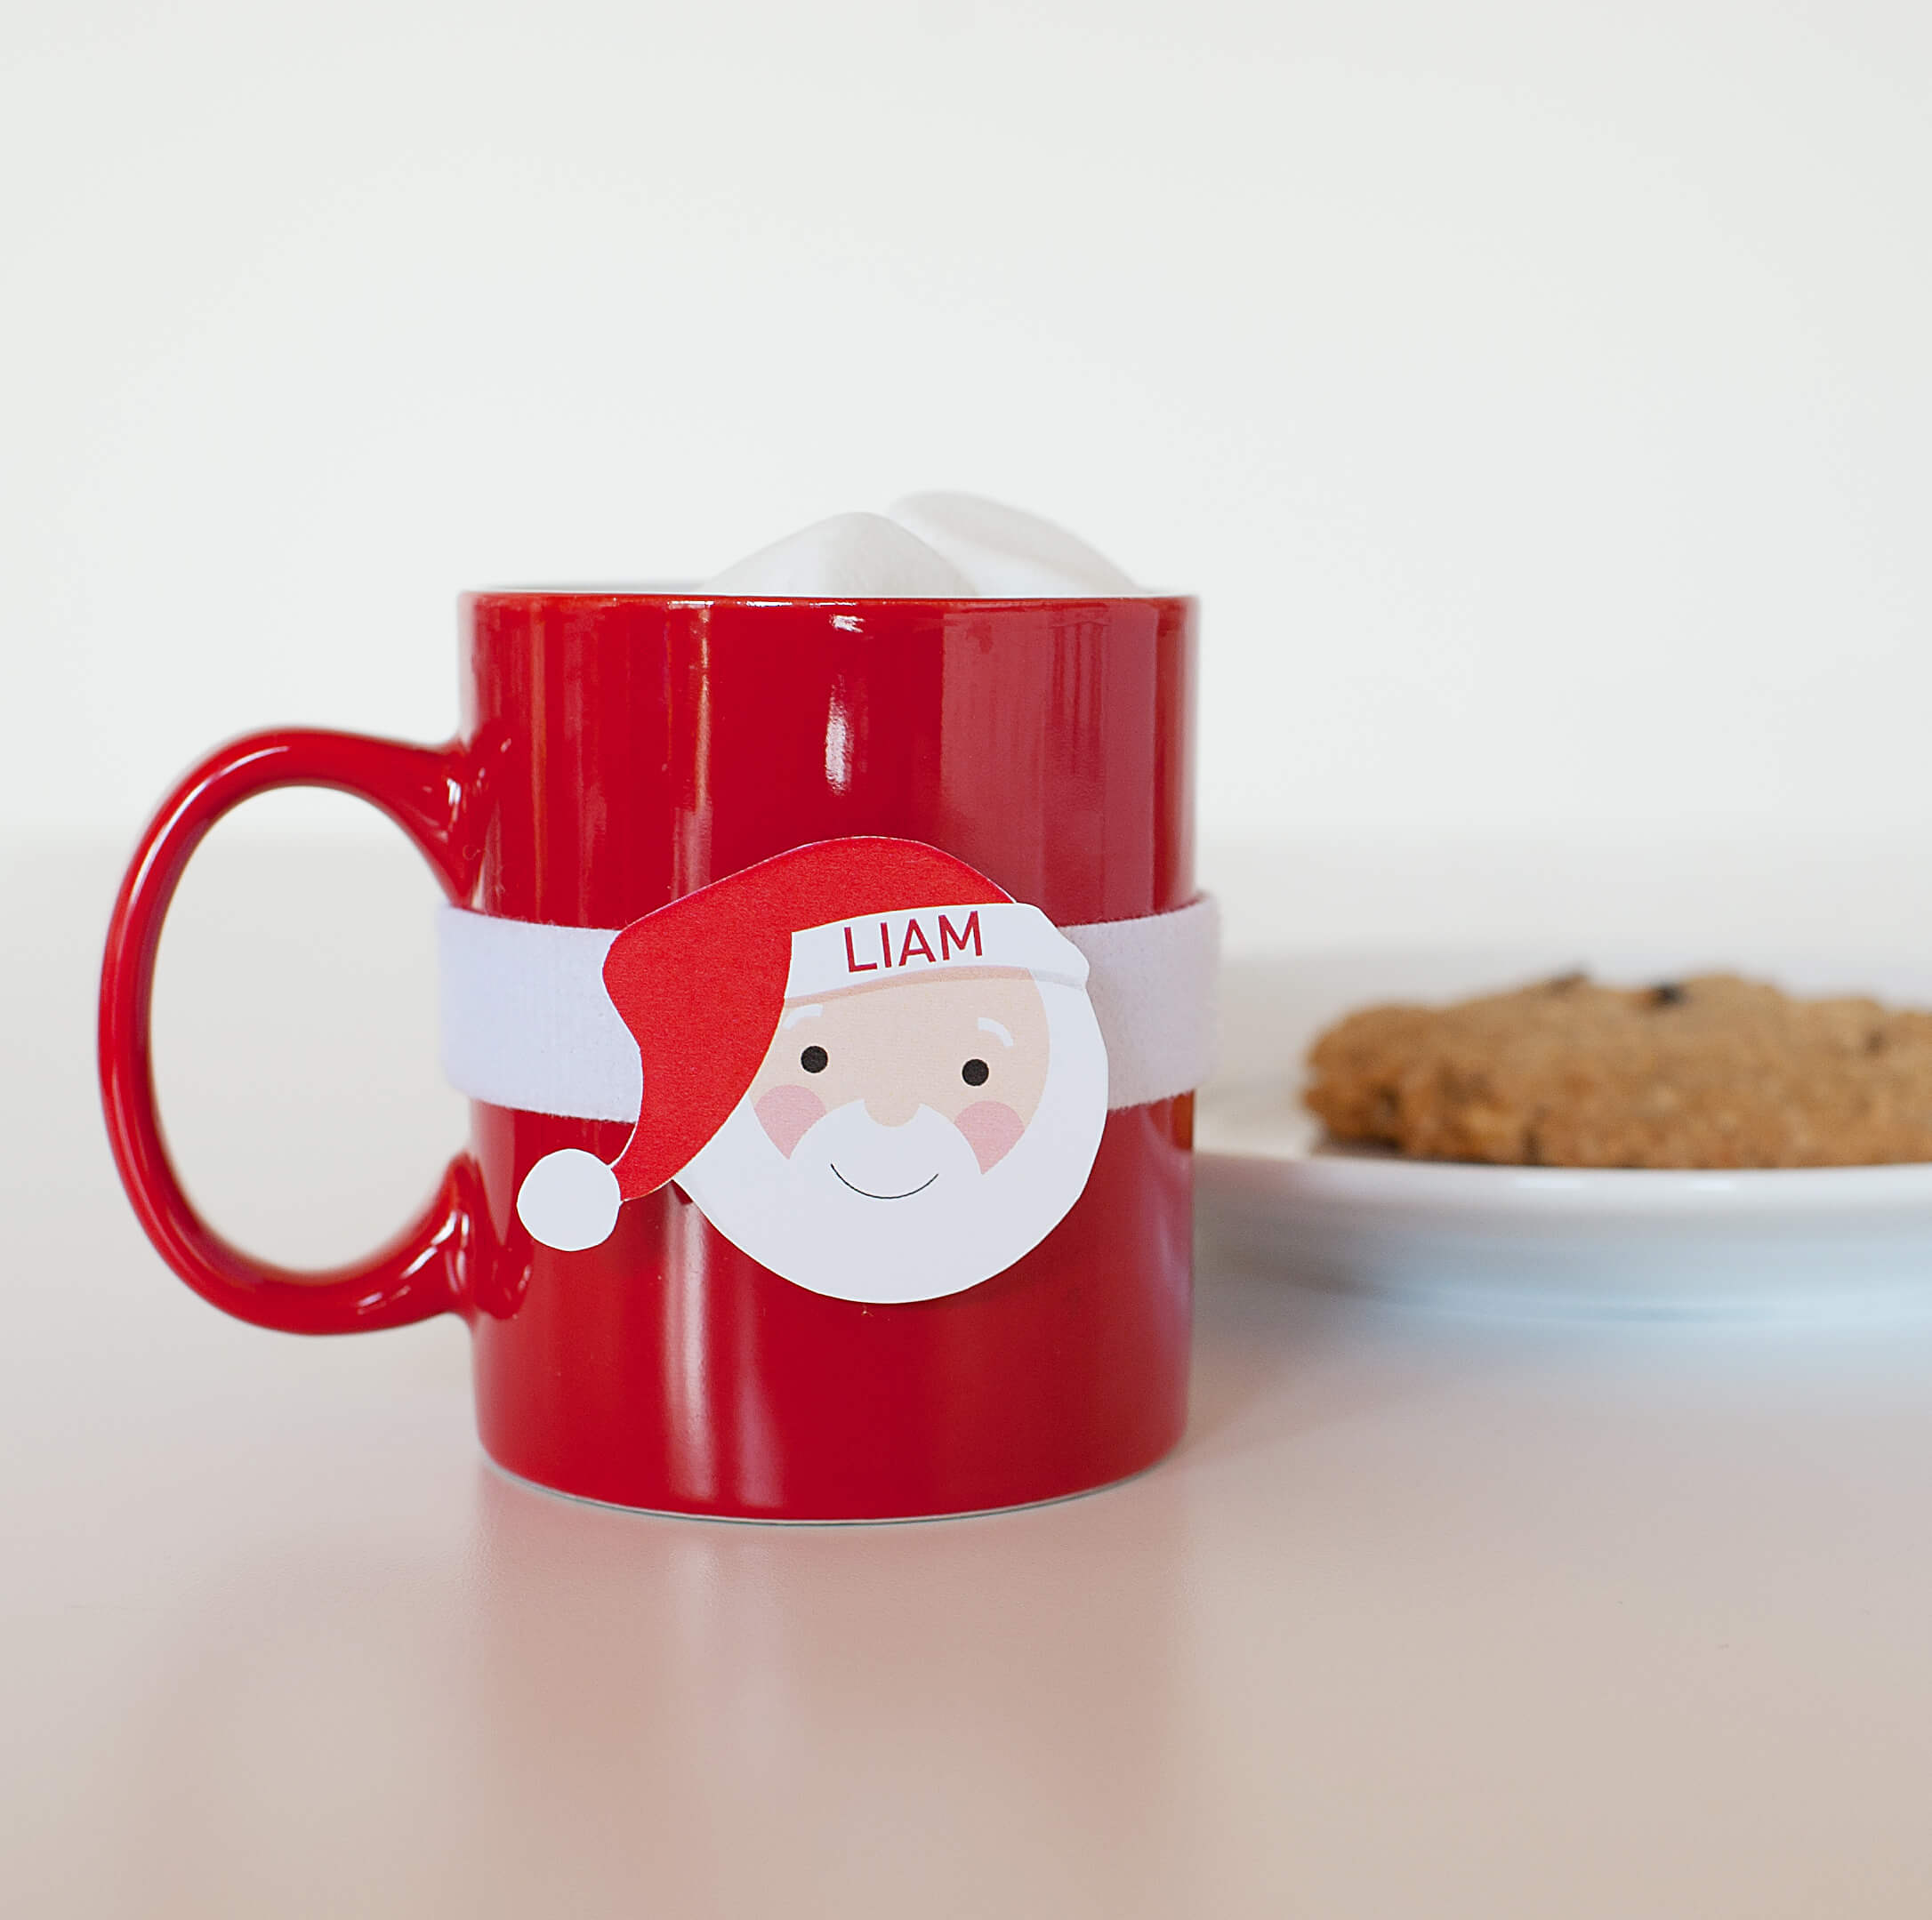 Personalized DIY holiday mugs - make one for each family member, just wrap and then unwrap to wash